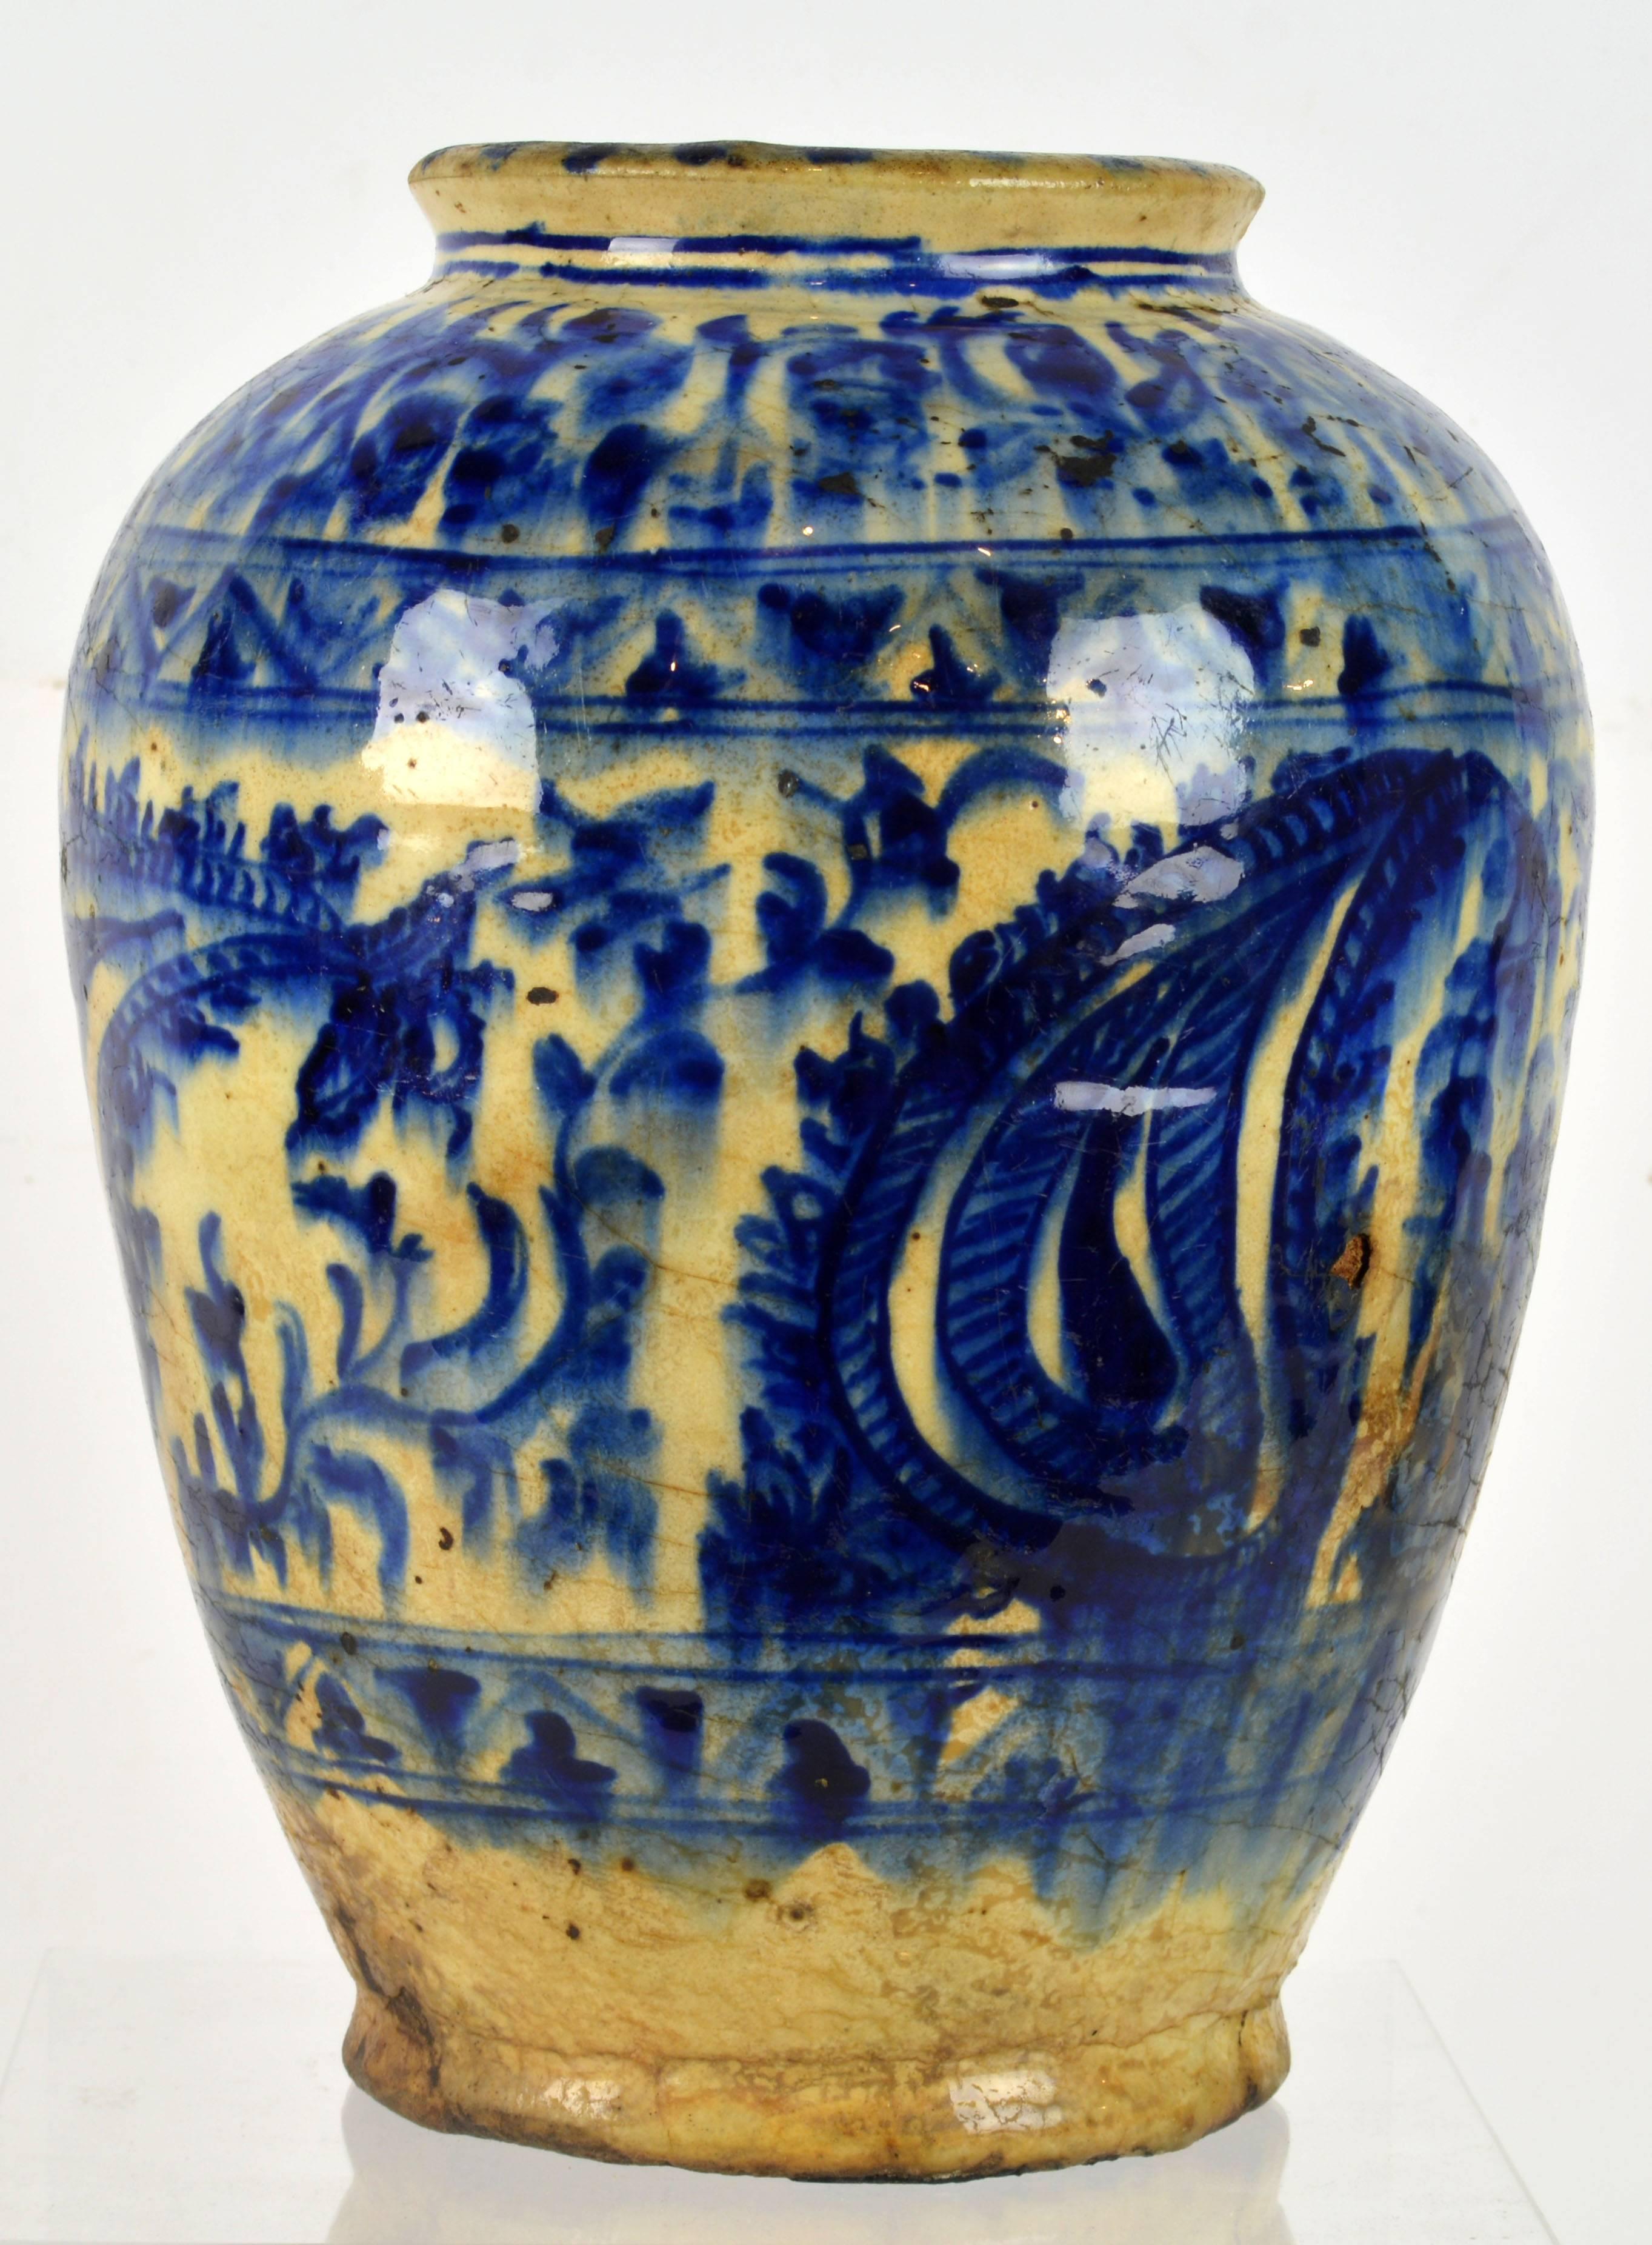 Standing 10.5 in. tall this Islamic museum quality pottery jar of great authenticity features a tapering baluster form decorated with blue and white glaze in a typical Syrio-Persian paisley style along with scrolling foliage and ornamental bands.